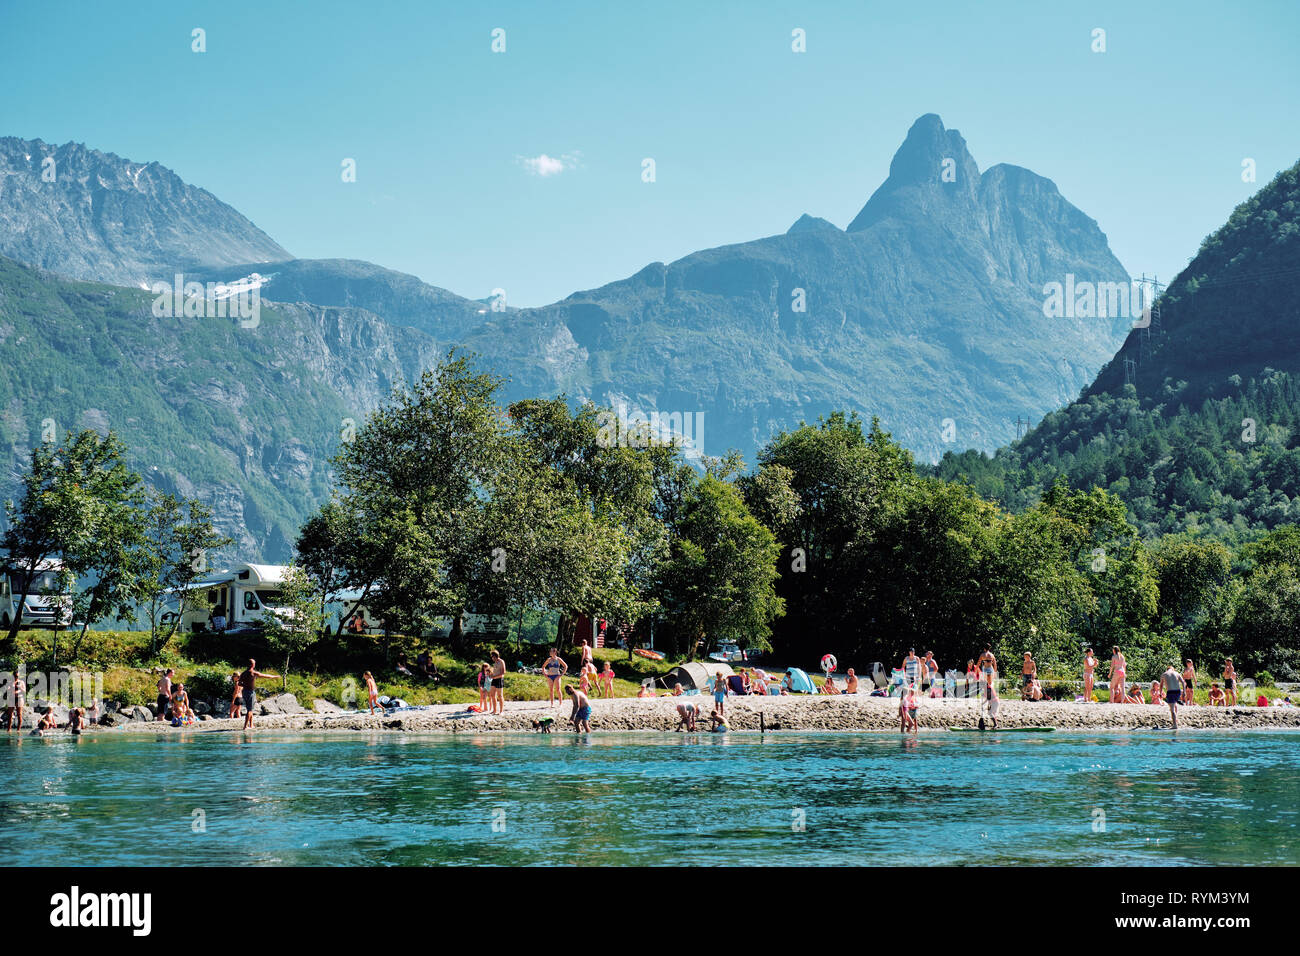 Bathers on the Rauma River in the summer landscape of the Romsdalen Valley near Åndalsnes, Norway Stock Photo